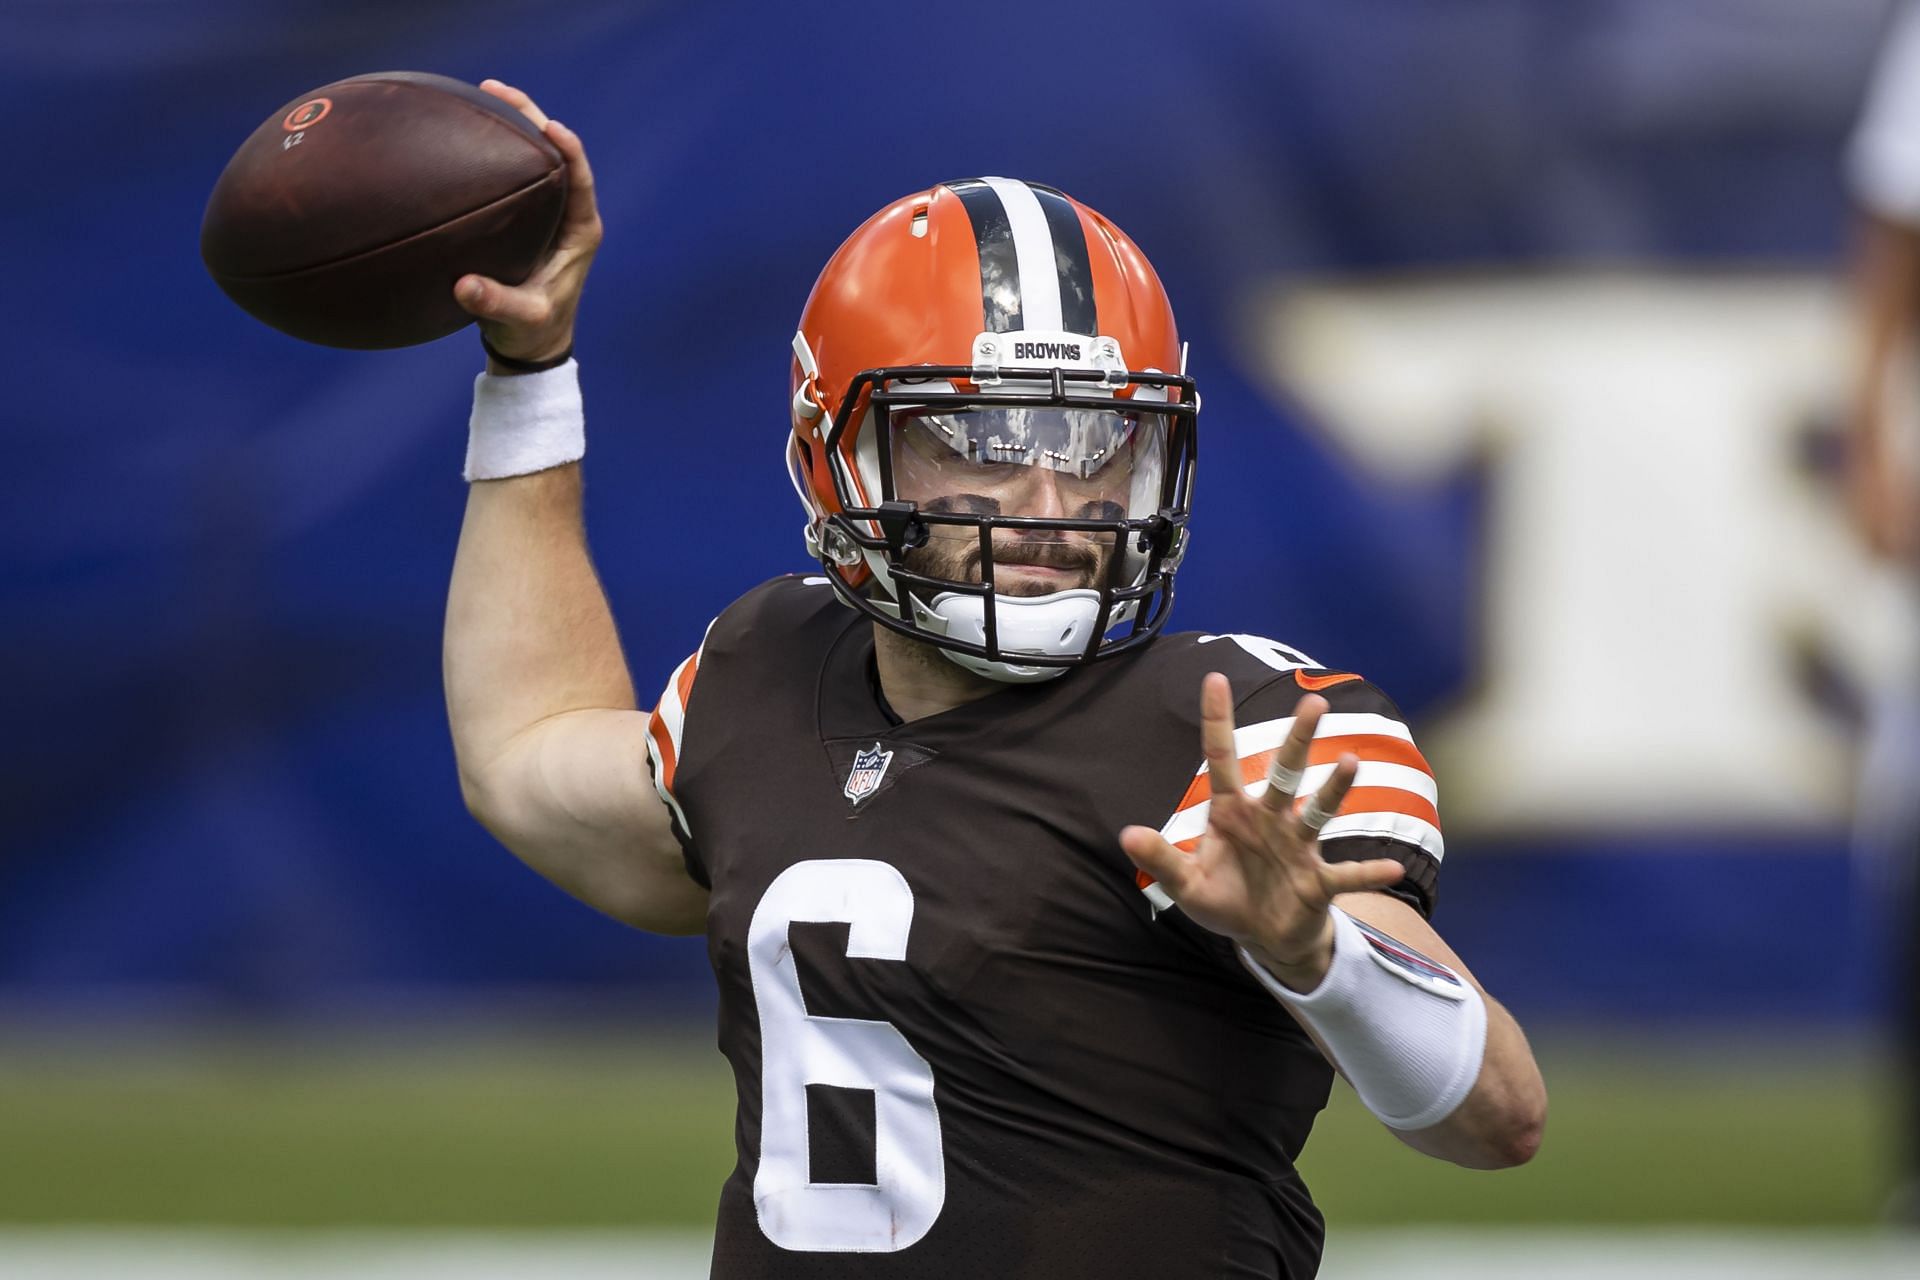 Former Cleveland Browns quarterback Baker Mayfield pulls back to pass